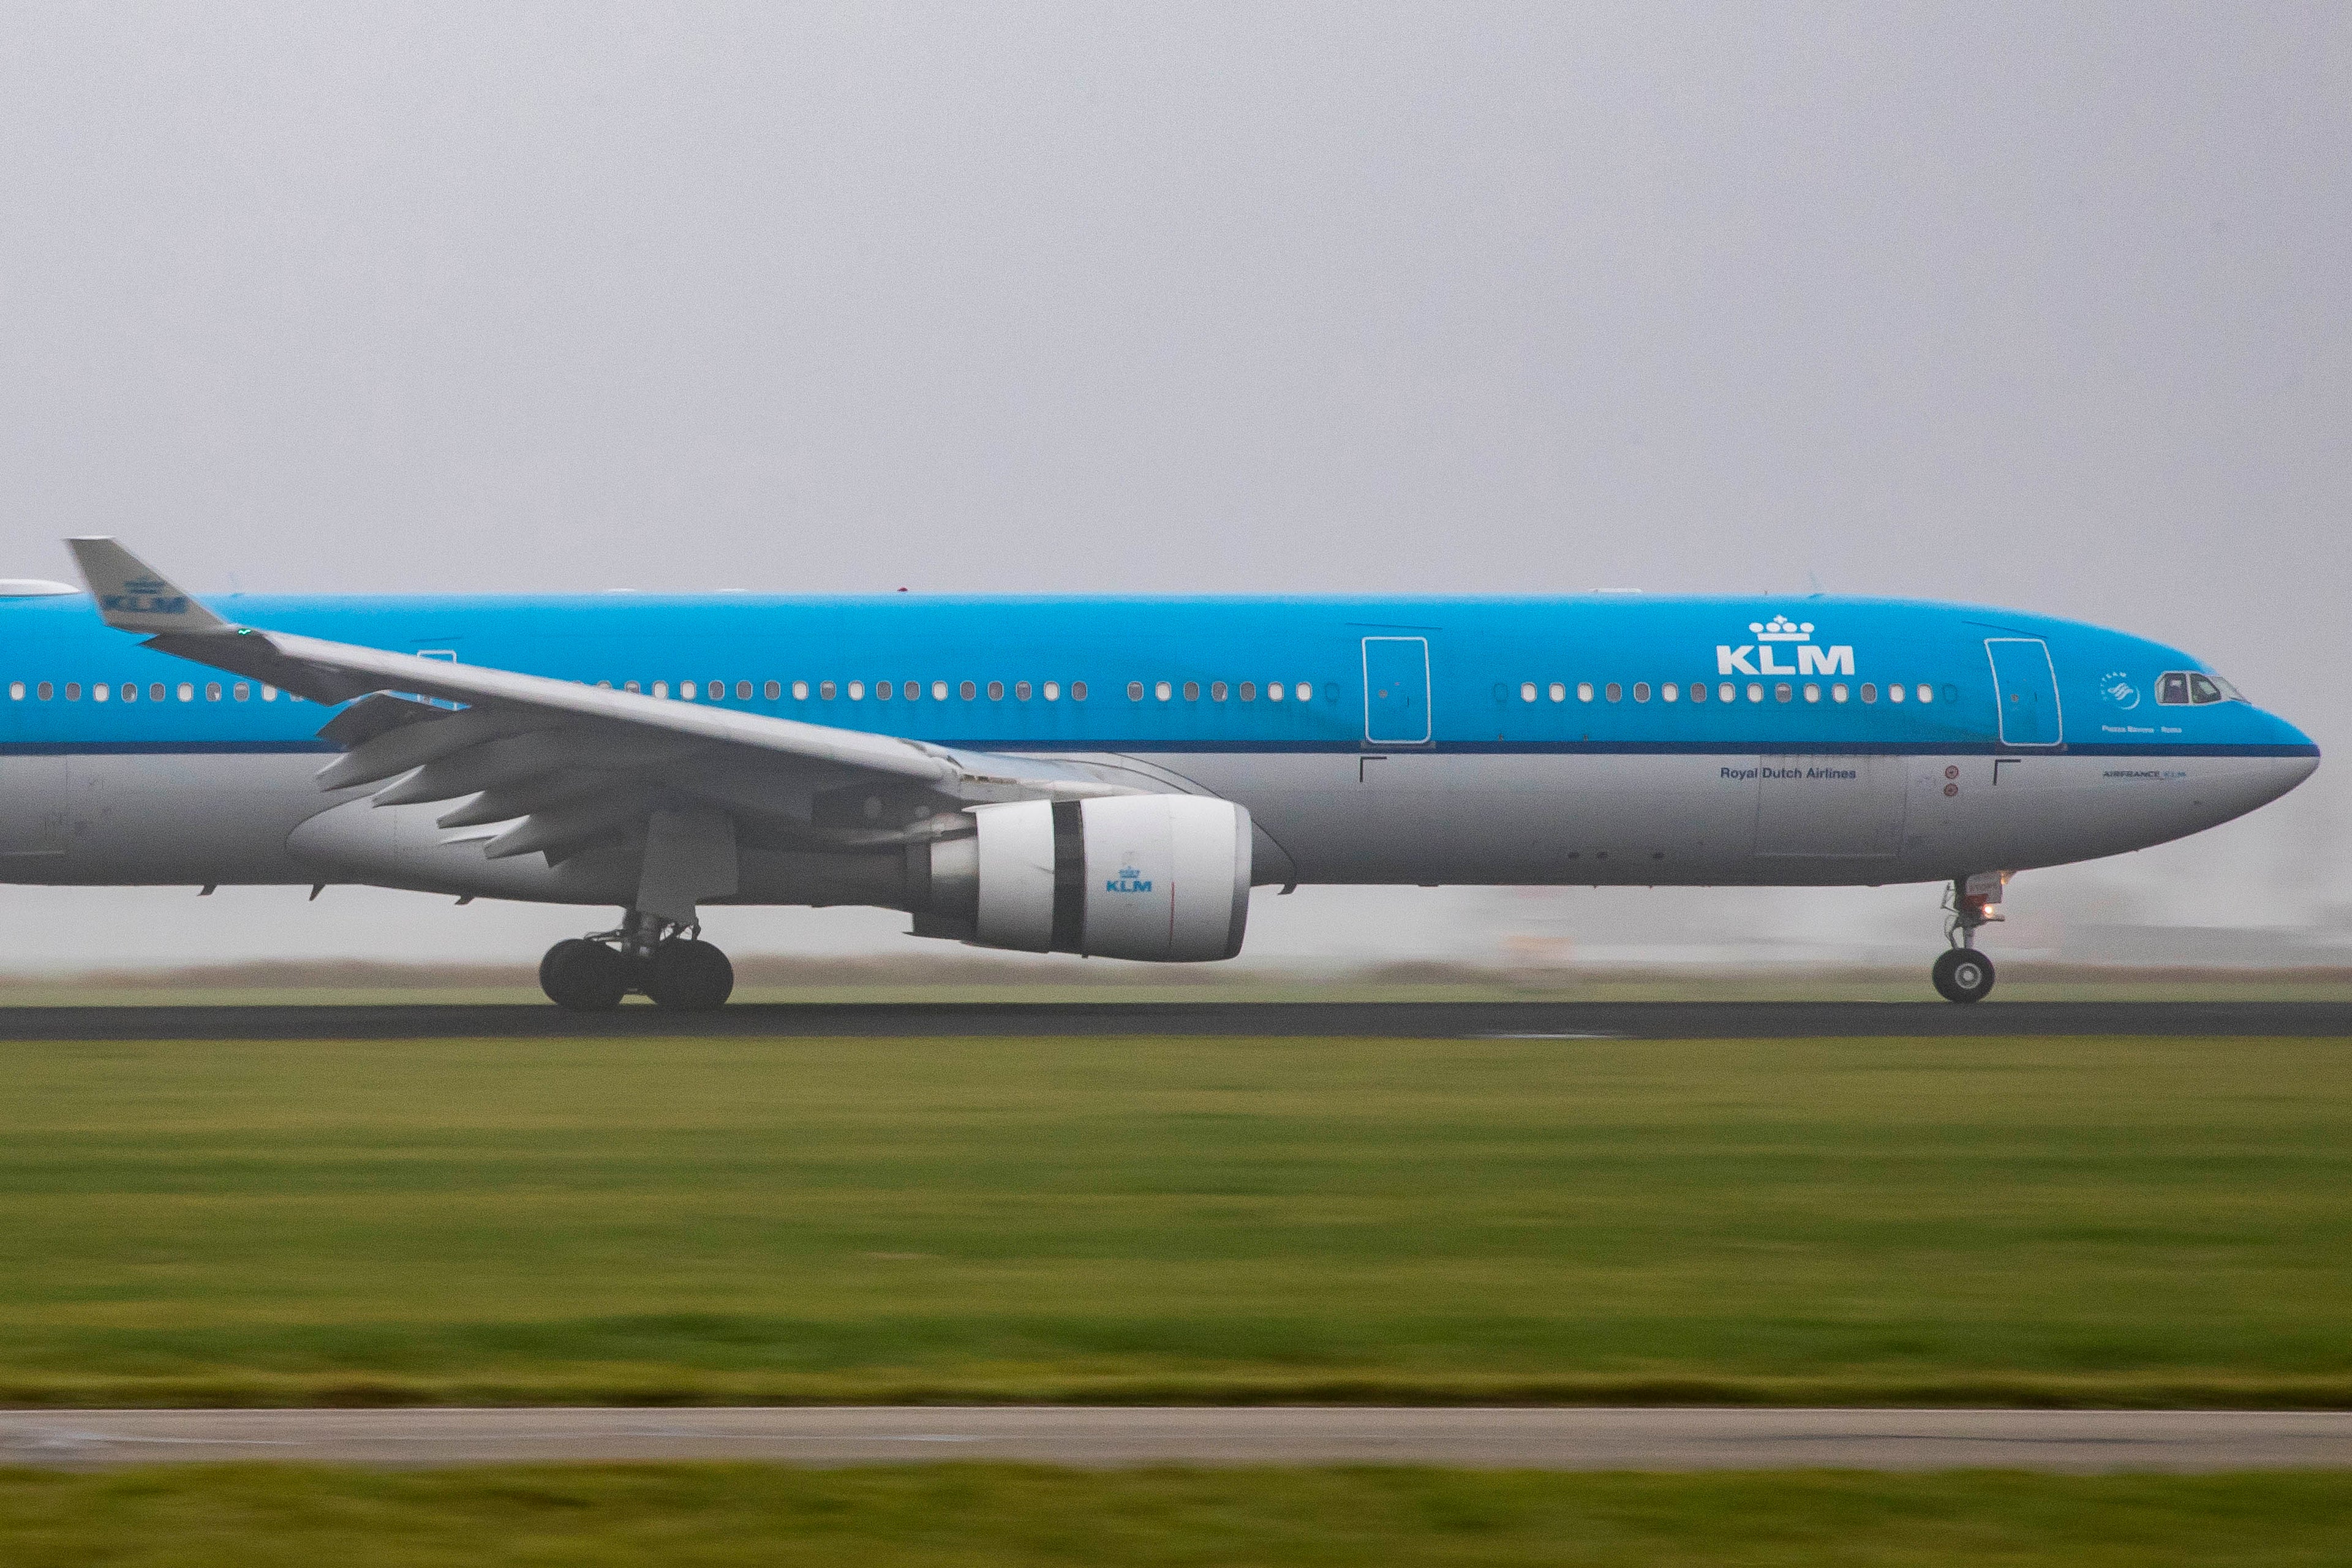 KLM Royal Dutch Airlines Airbus A330-300 with registration